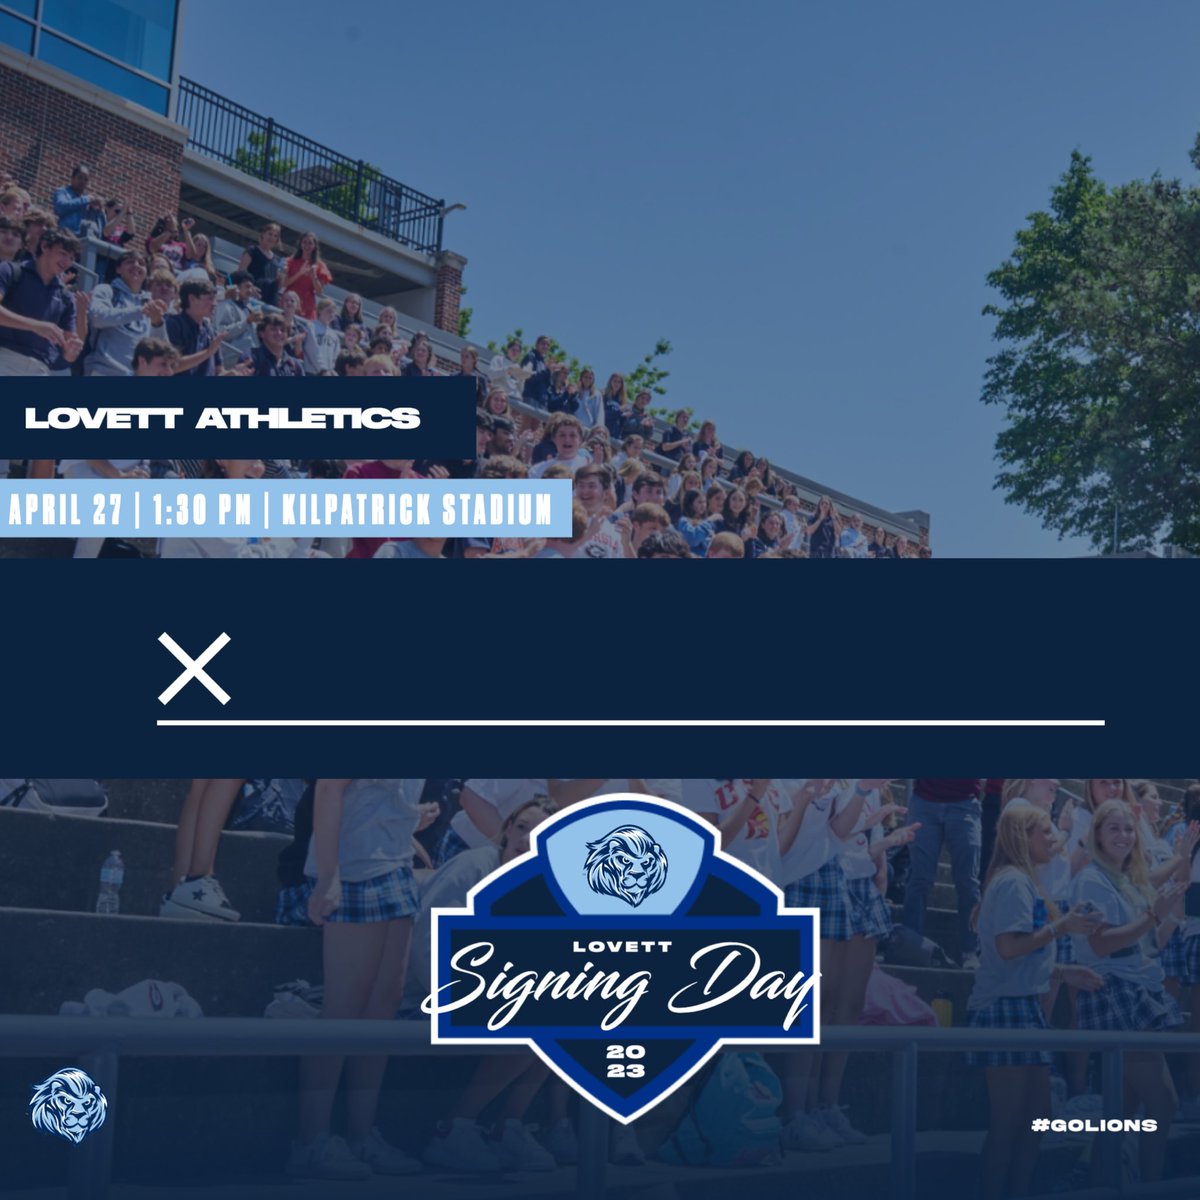 Lovett’s Signing Day is this week!!!

Lovett will be recognizing the class of 2023 student athletes who have committed to play at the next level. Be there on Thursday at 1:30 PM (During US lunch) to support your fellow Lions!!!
 #GOLIONS 